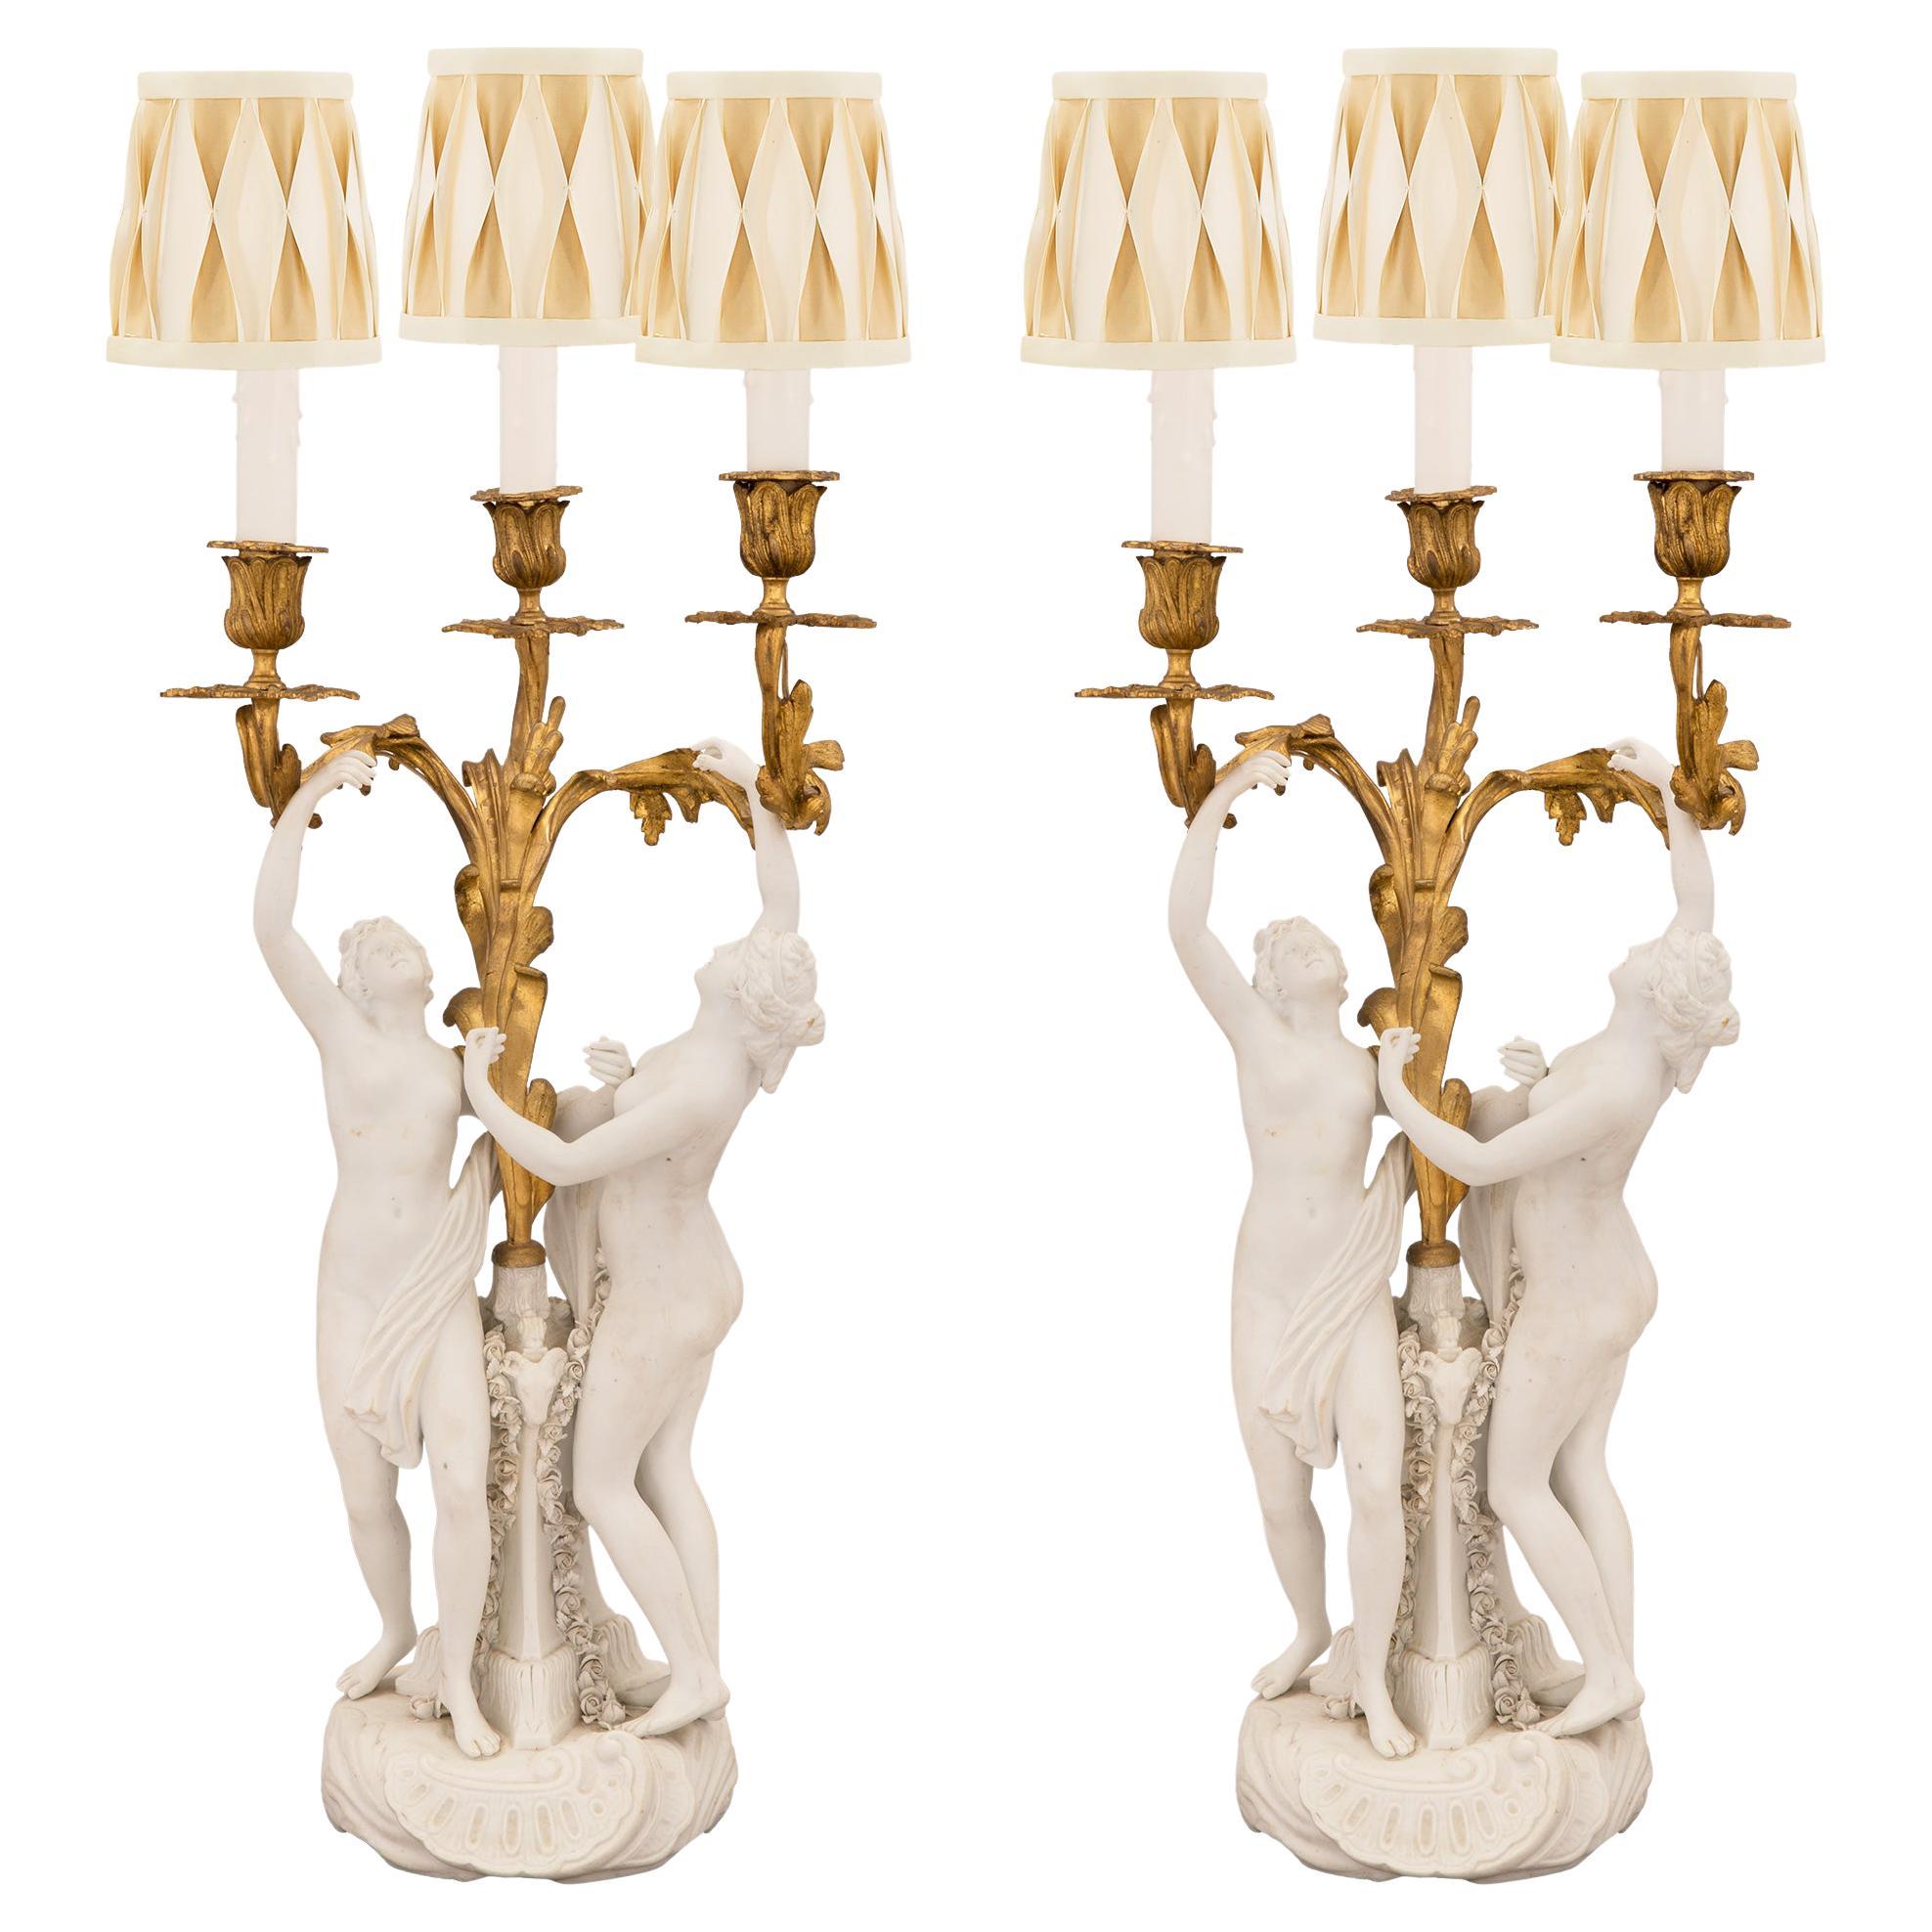 Pair of French 19th Century Louis XV Style Candelabra Lamps, Signed Sèvres For Sale